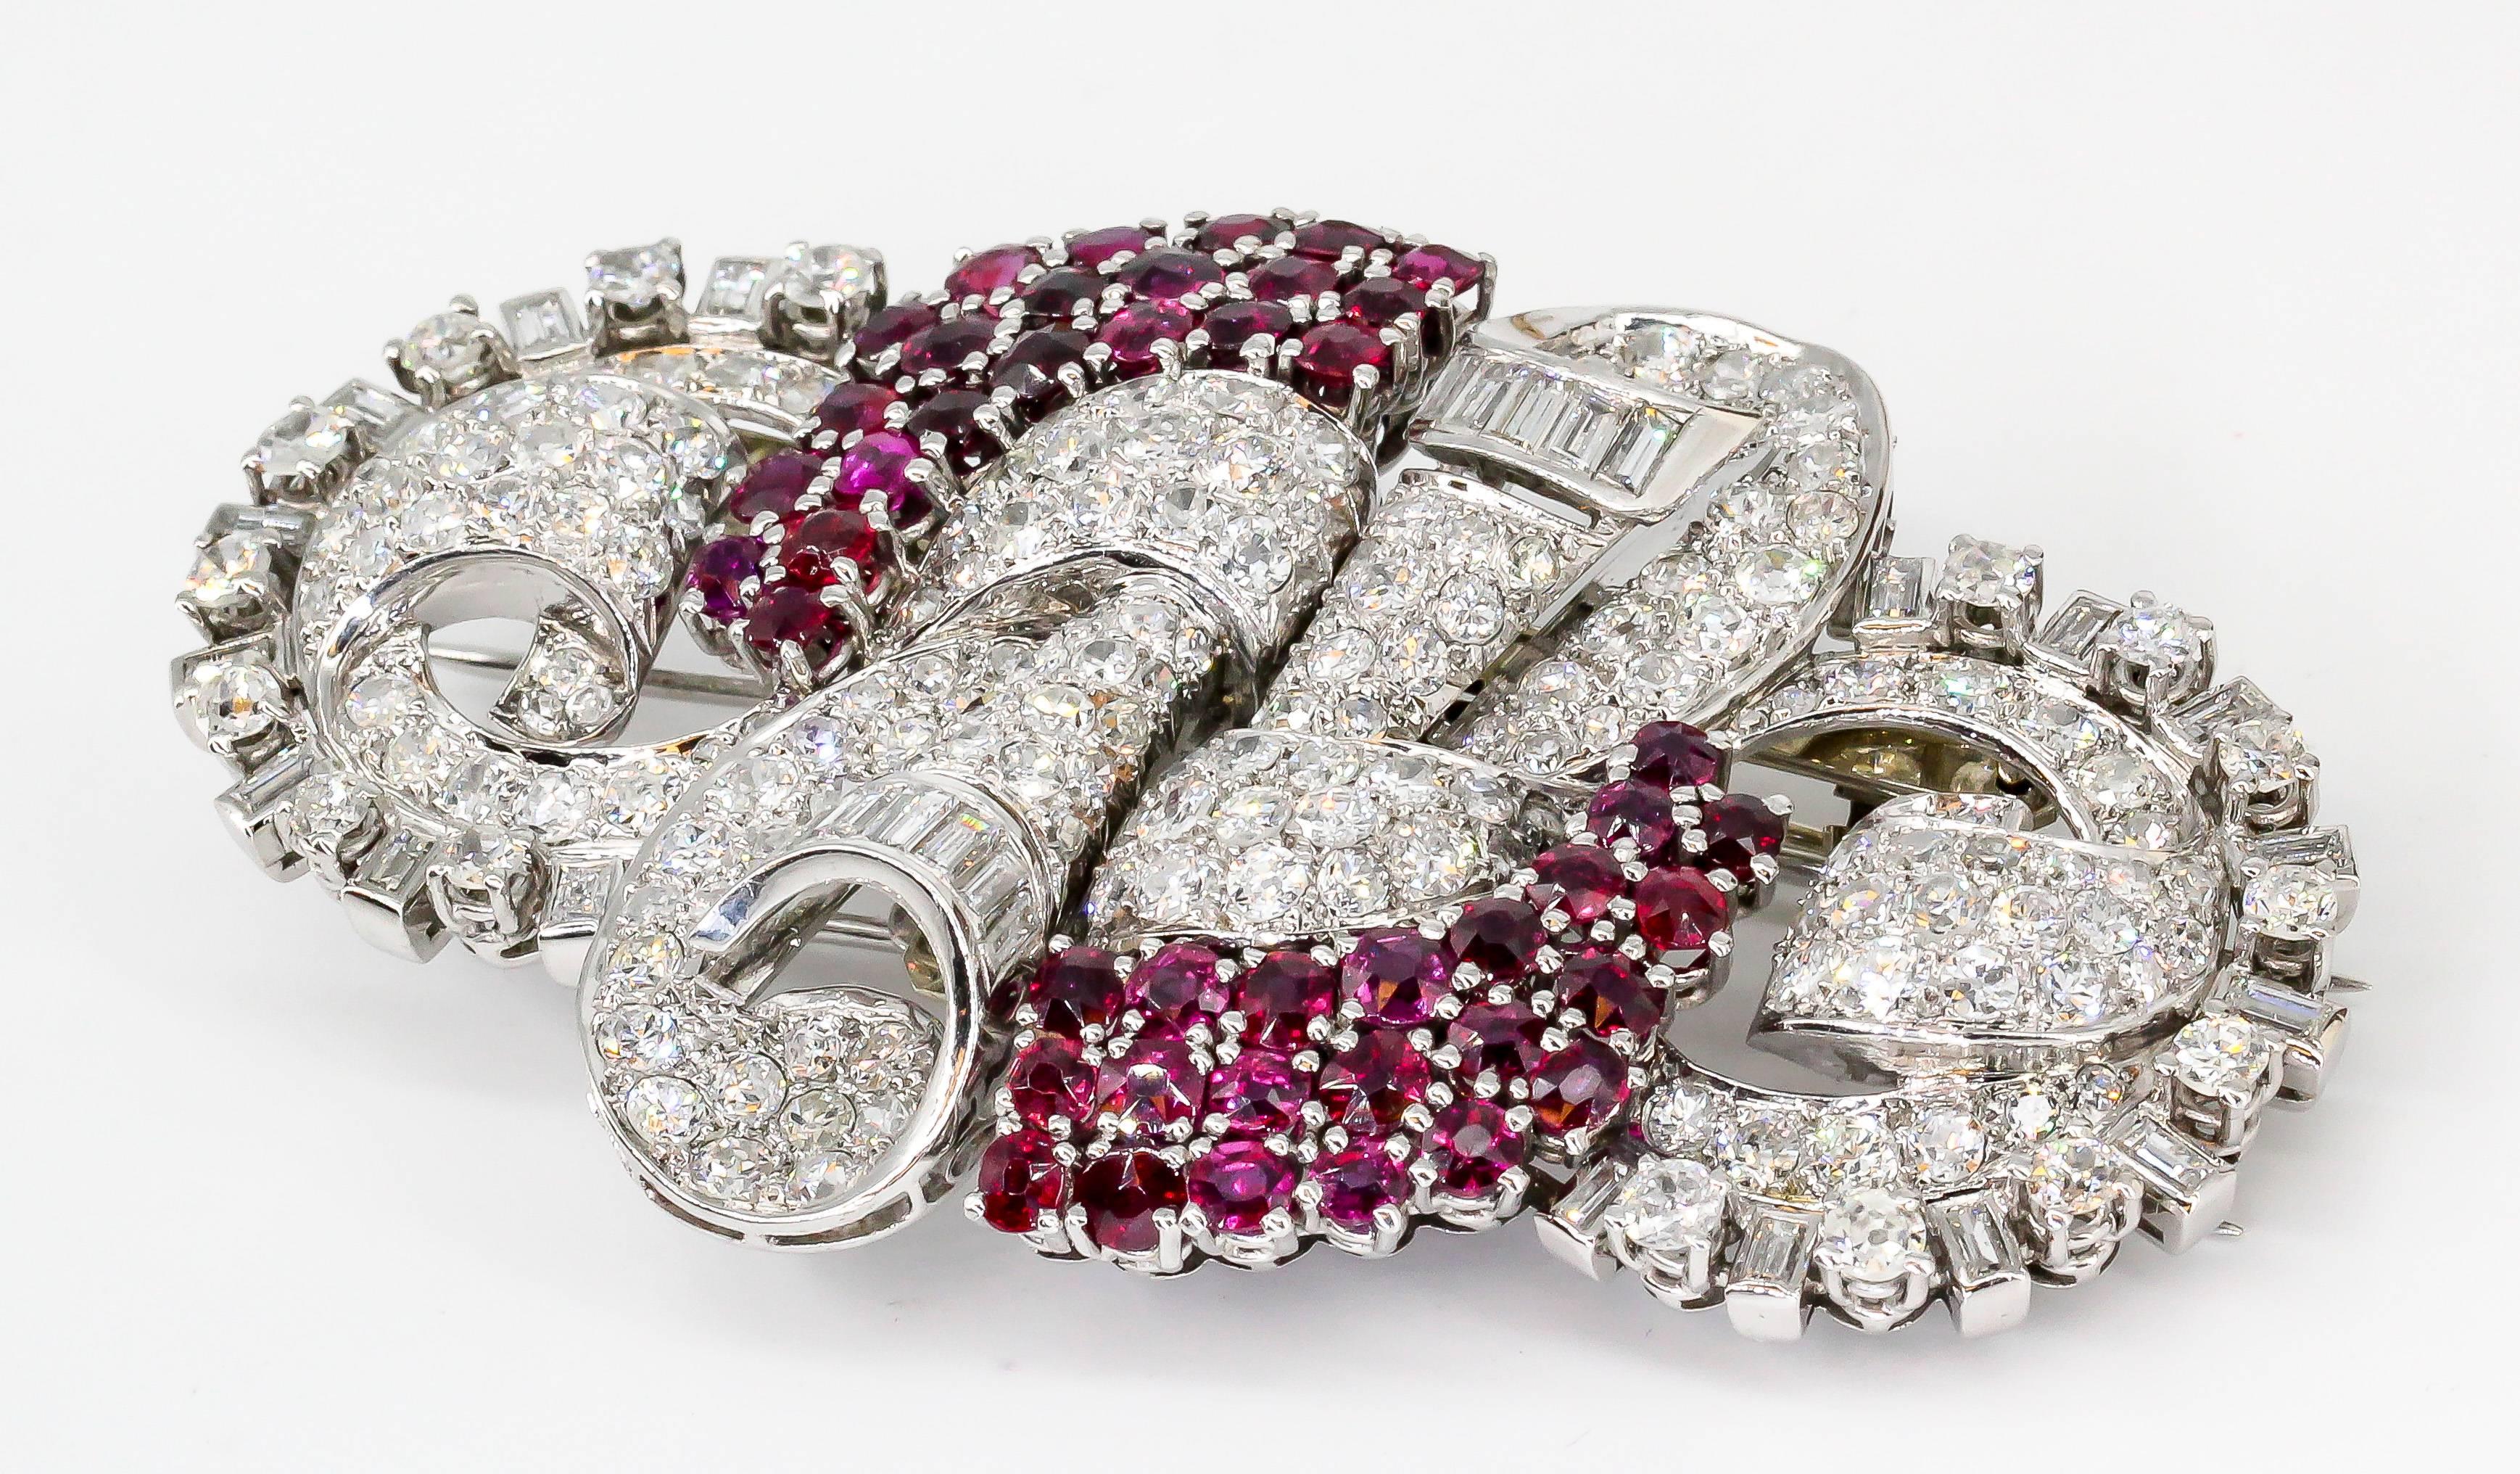 Impressive ruby, diamond, platinum and 18K gold double-clip brooch of French origin, circa Art Deco period (1920s-1930s). It features high grade round and baguette cut diamonds throughout, along with rich red rubies over a platinum setting and 18K